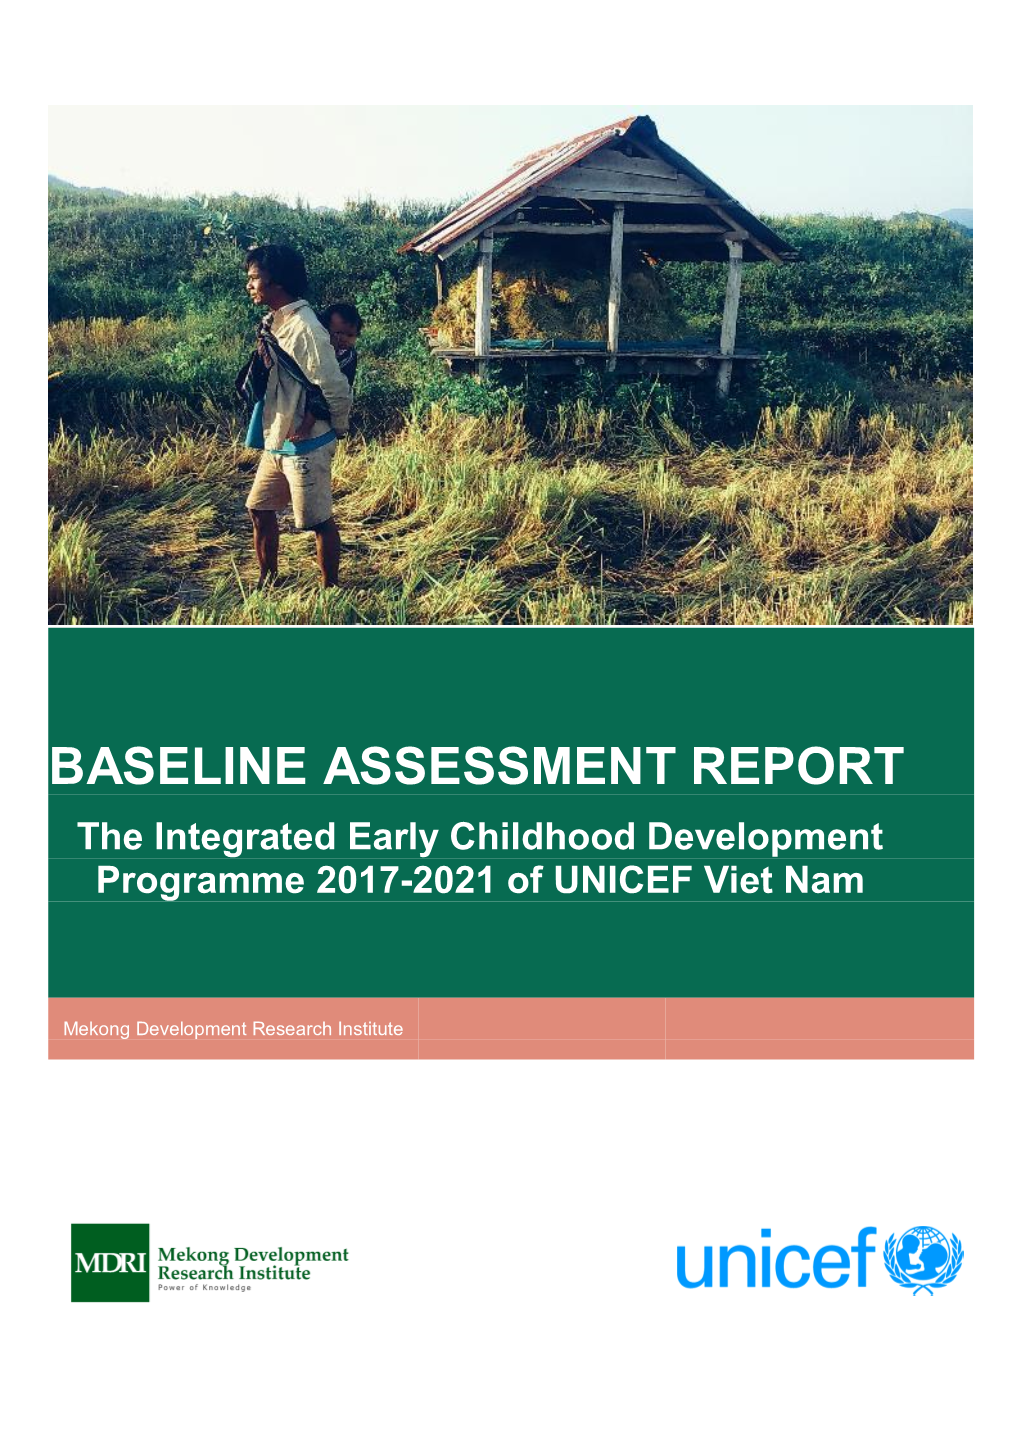 BASELINE ASSESSMENT REPORT the Integrated Early Childhood Development Programme 2017-2021 of UNICEF Viet Nam